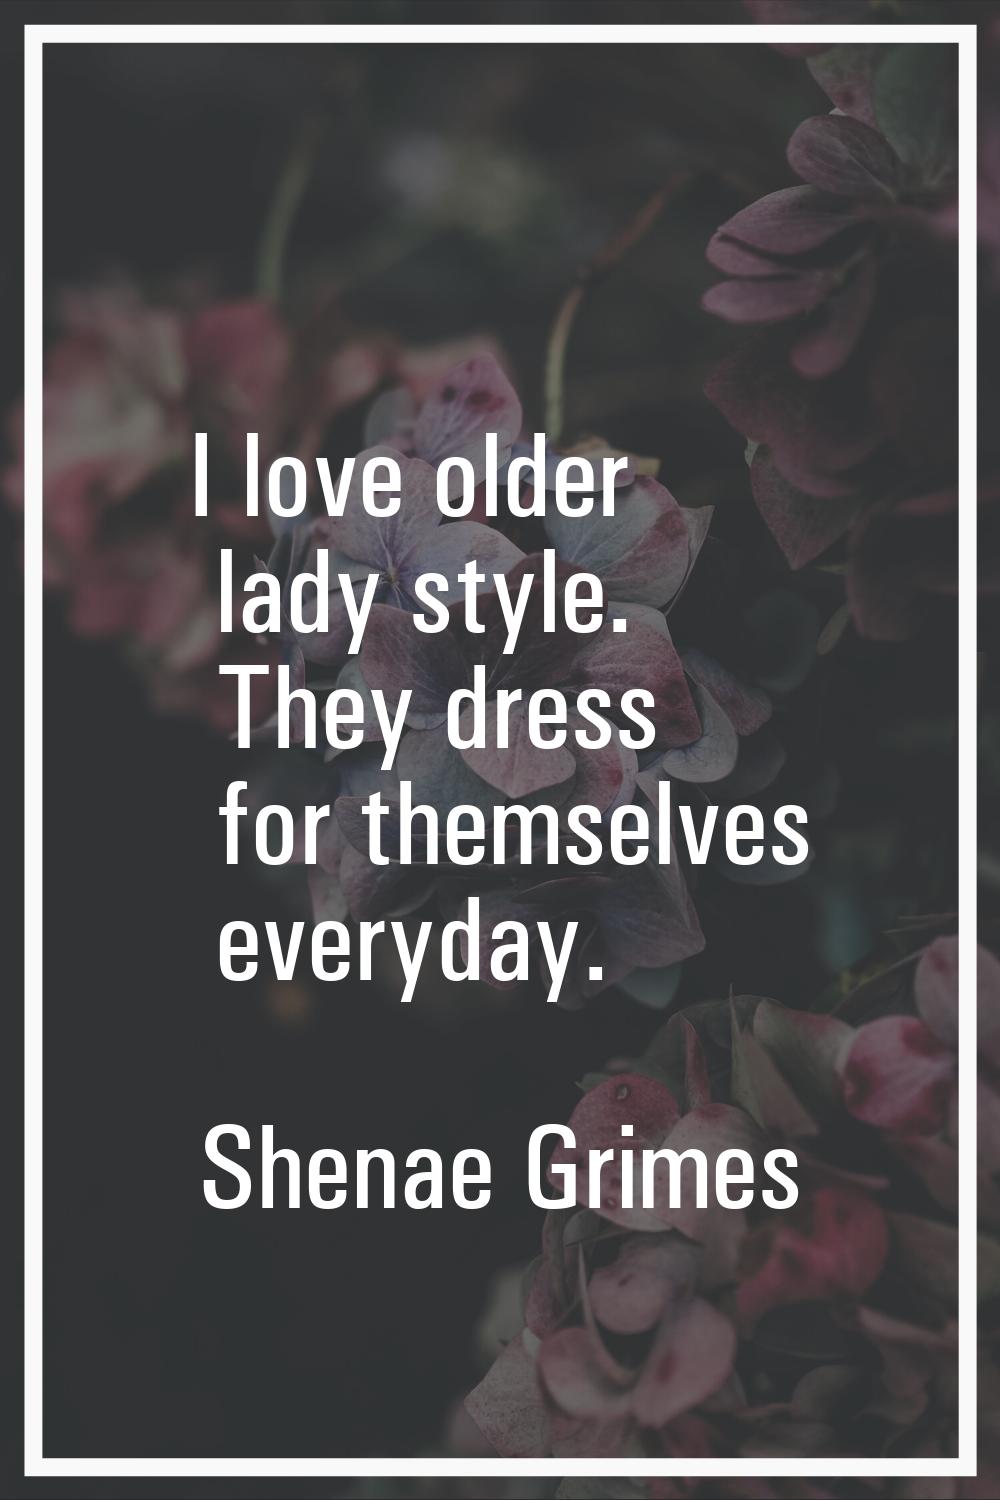 I love older lady style. They dress for themselves everyday.